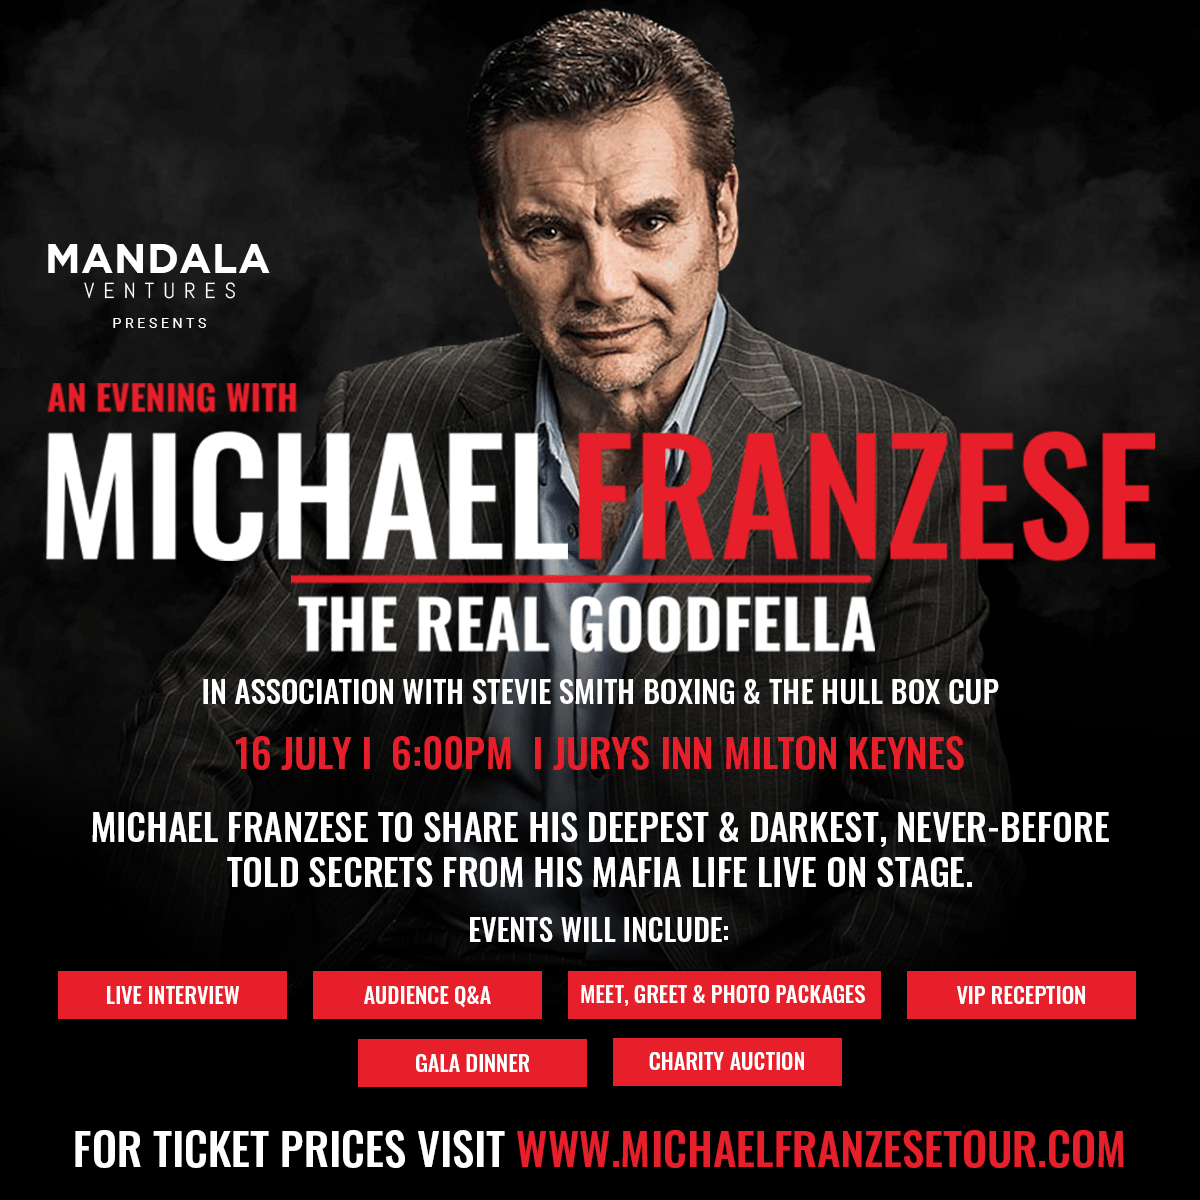 Milton Keynes to host ‘An Evening with Michael Franzese – The Real Goodfella’ Top Image